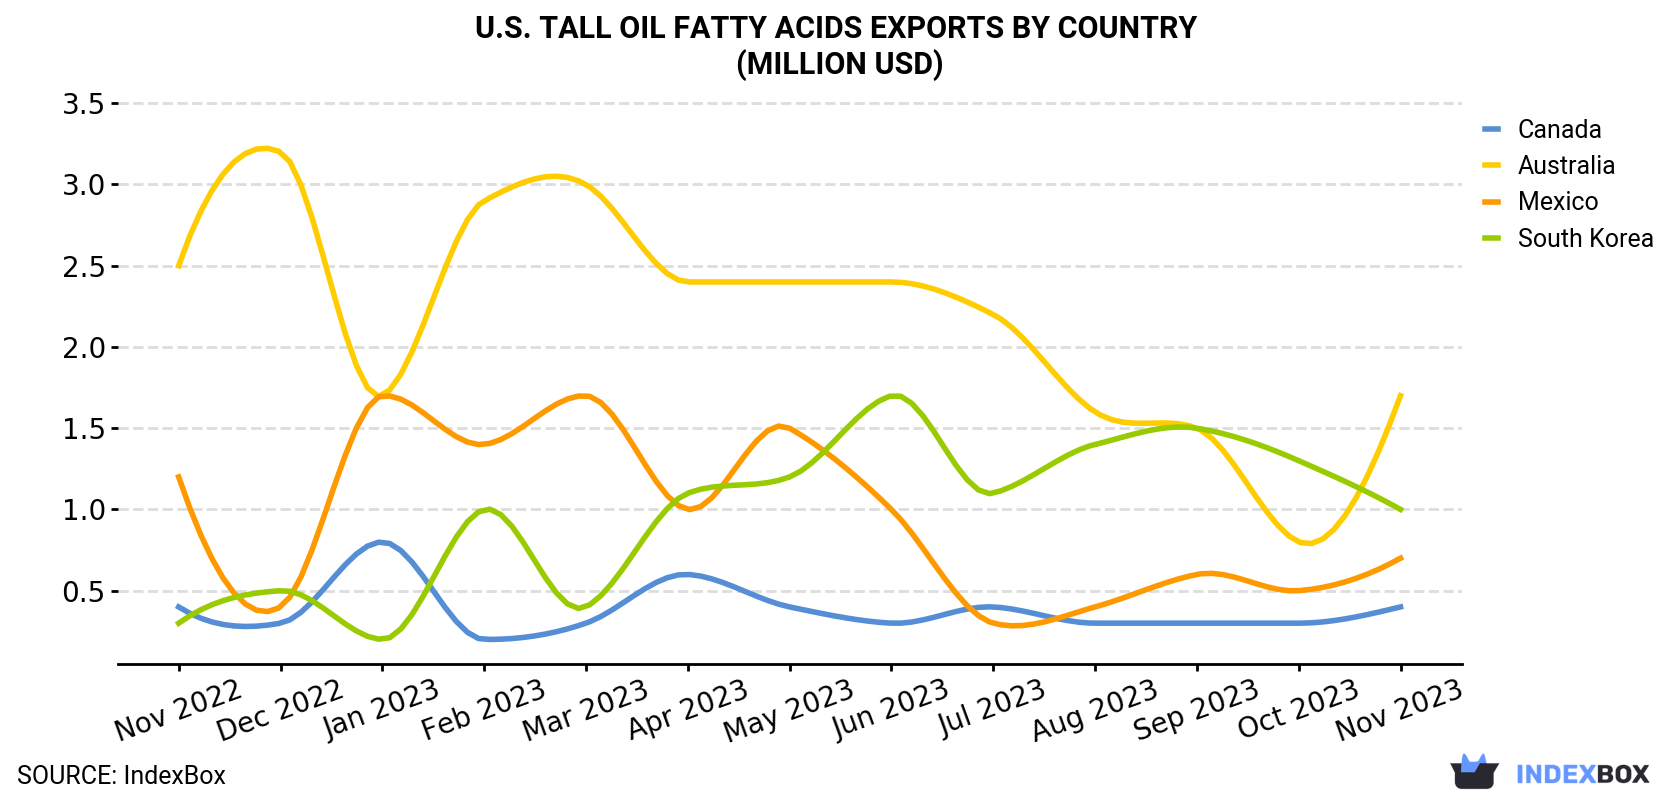 U.S. Tall Oil Fatty Acids Exports By Country (Million USD)